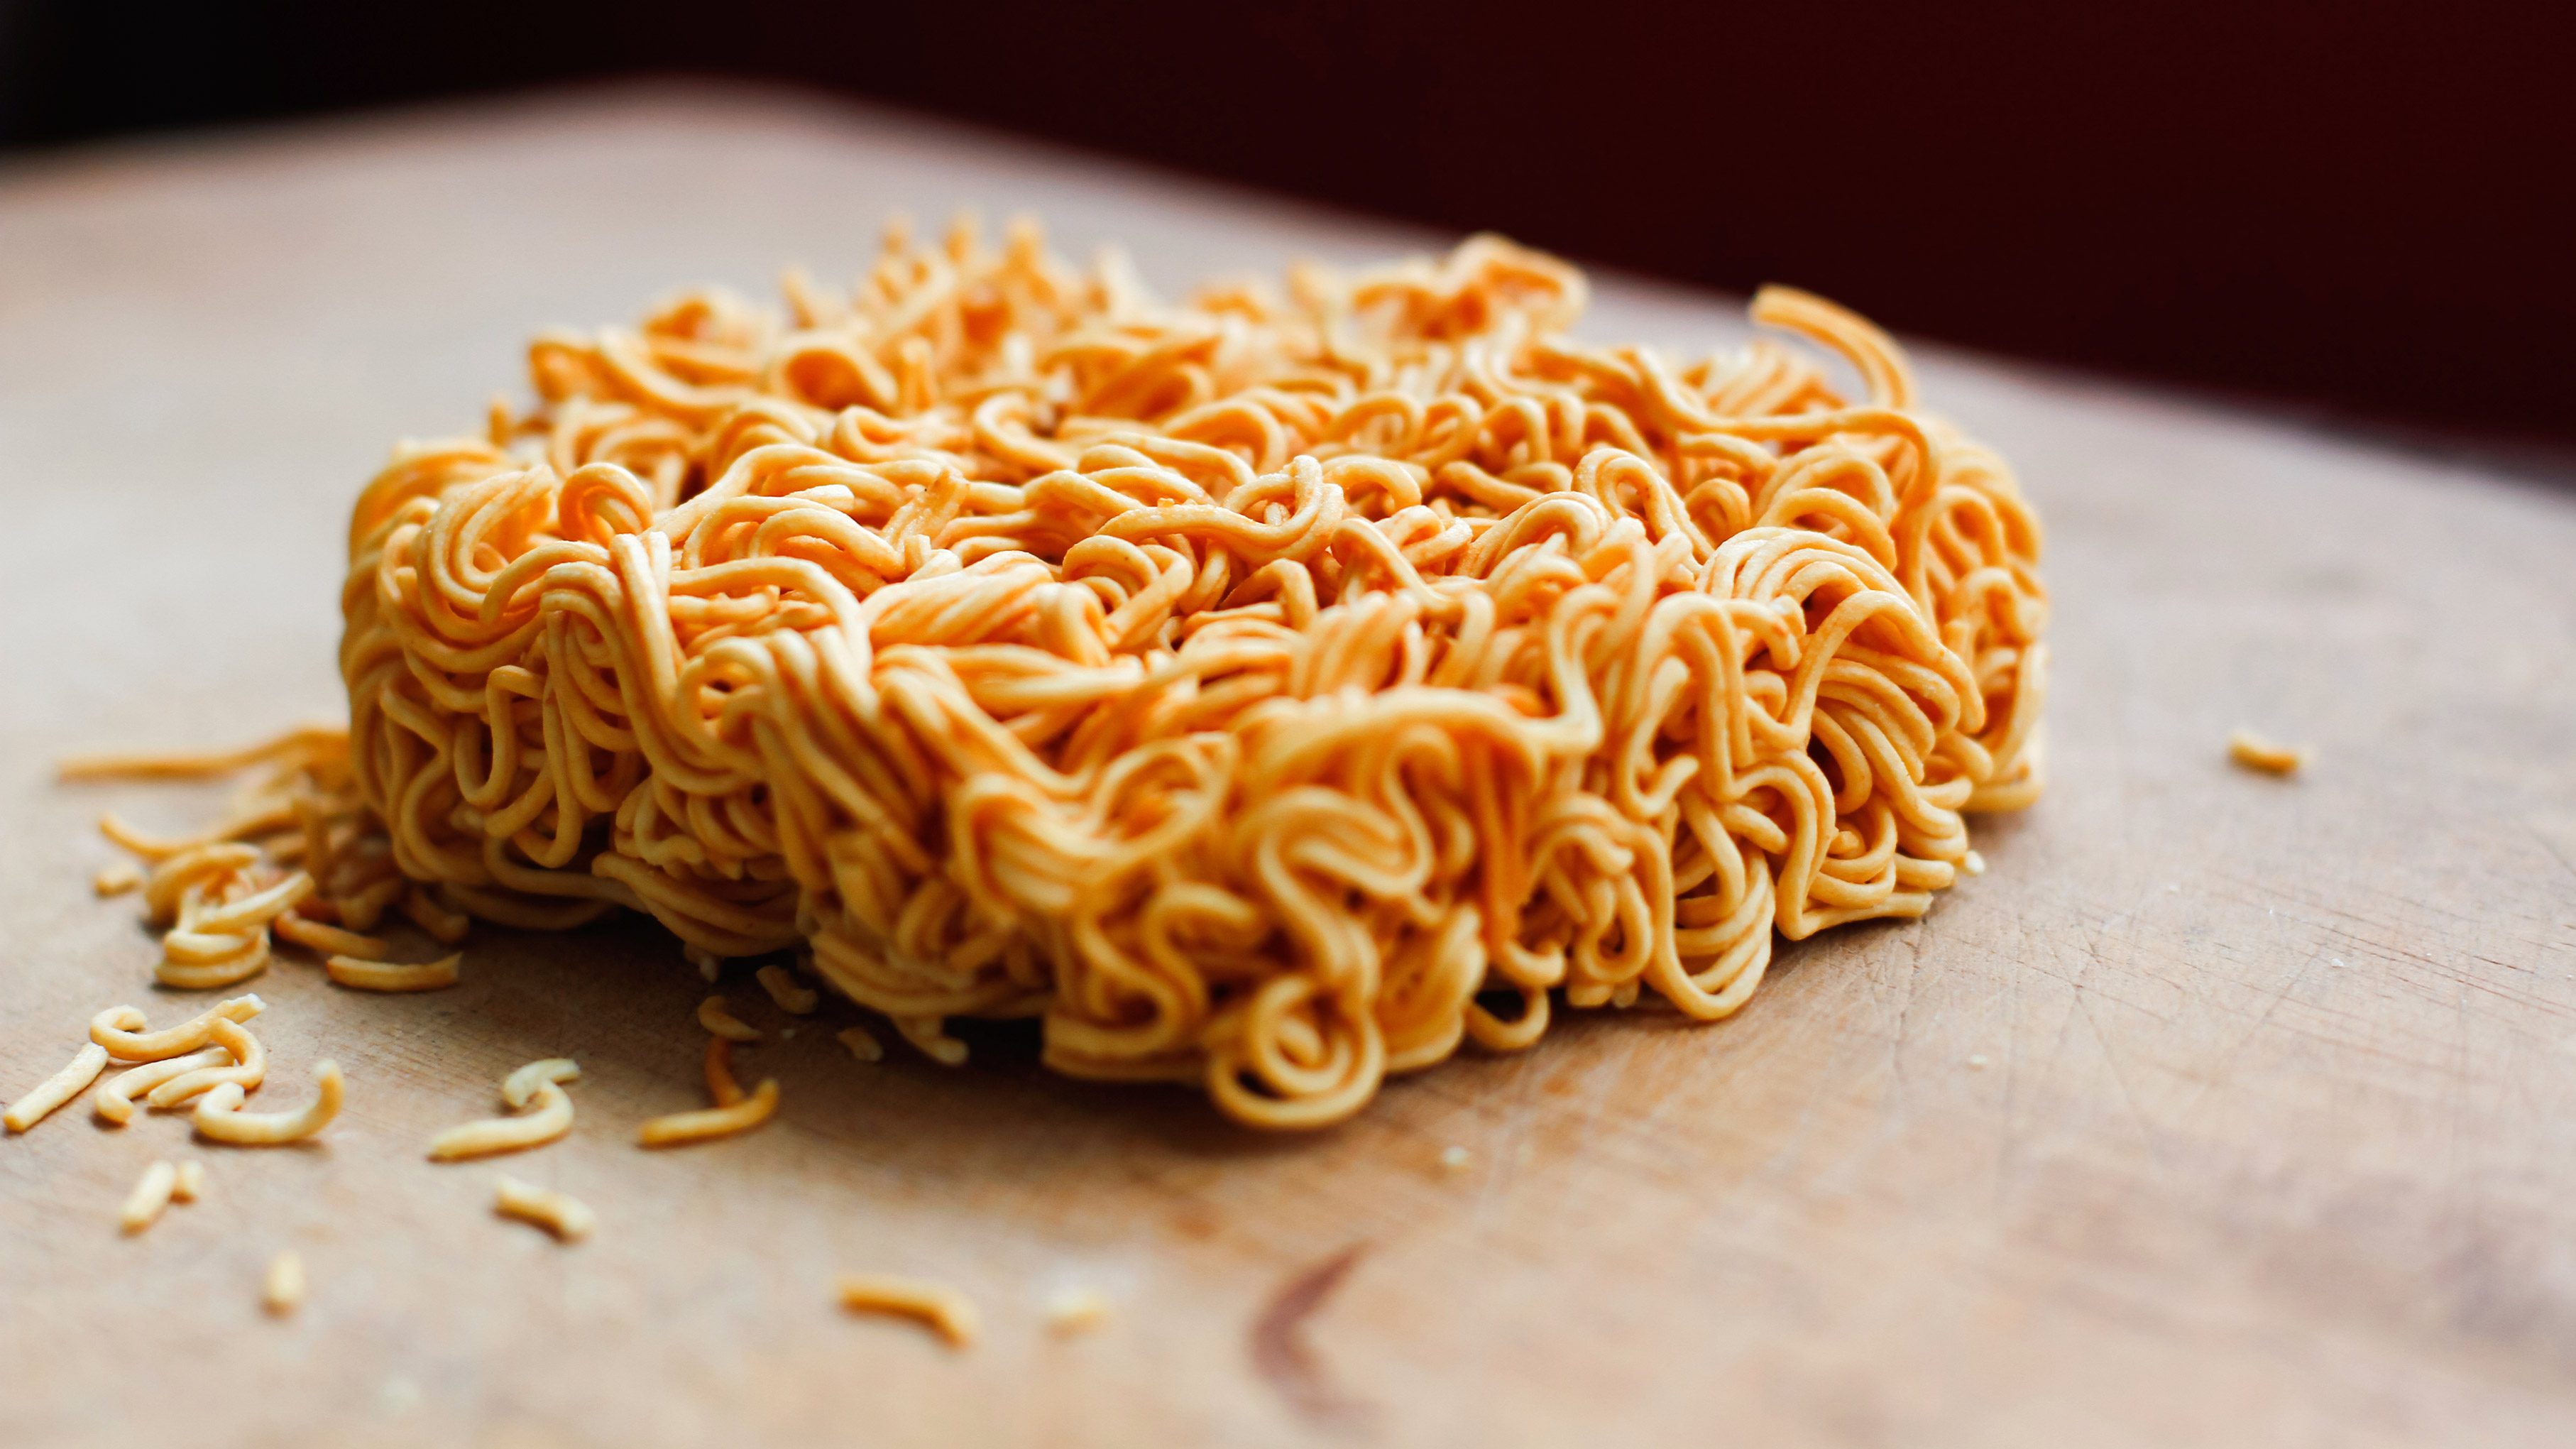 Why you shouldn’t eat instant noodles too often